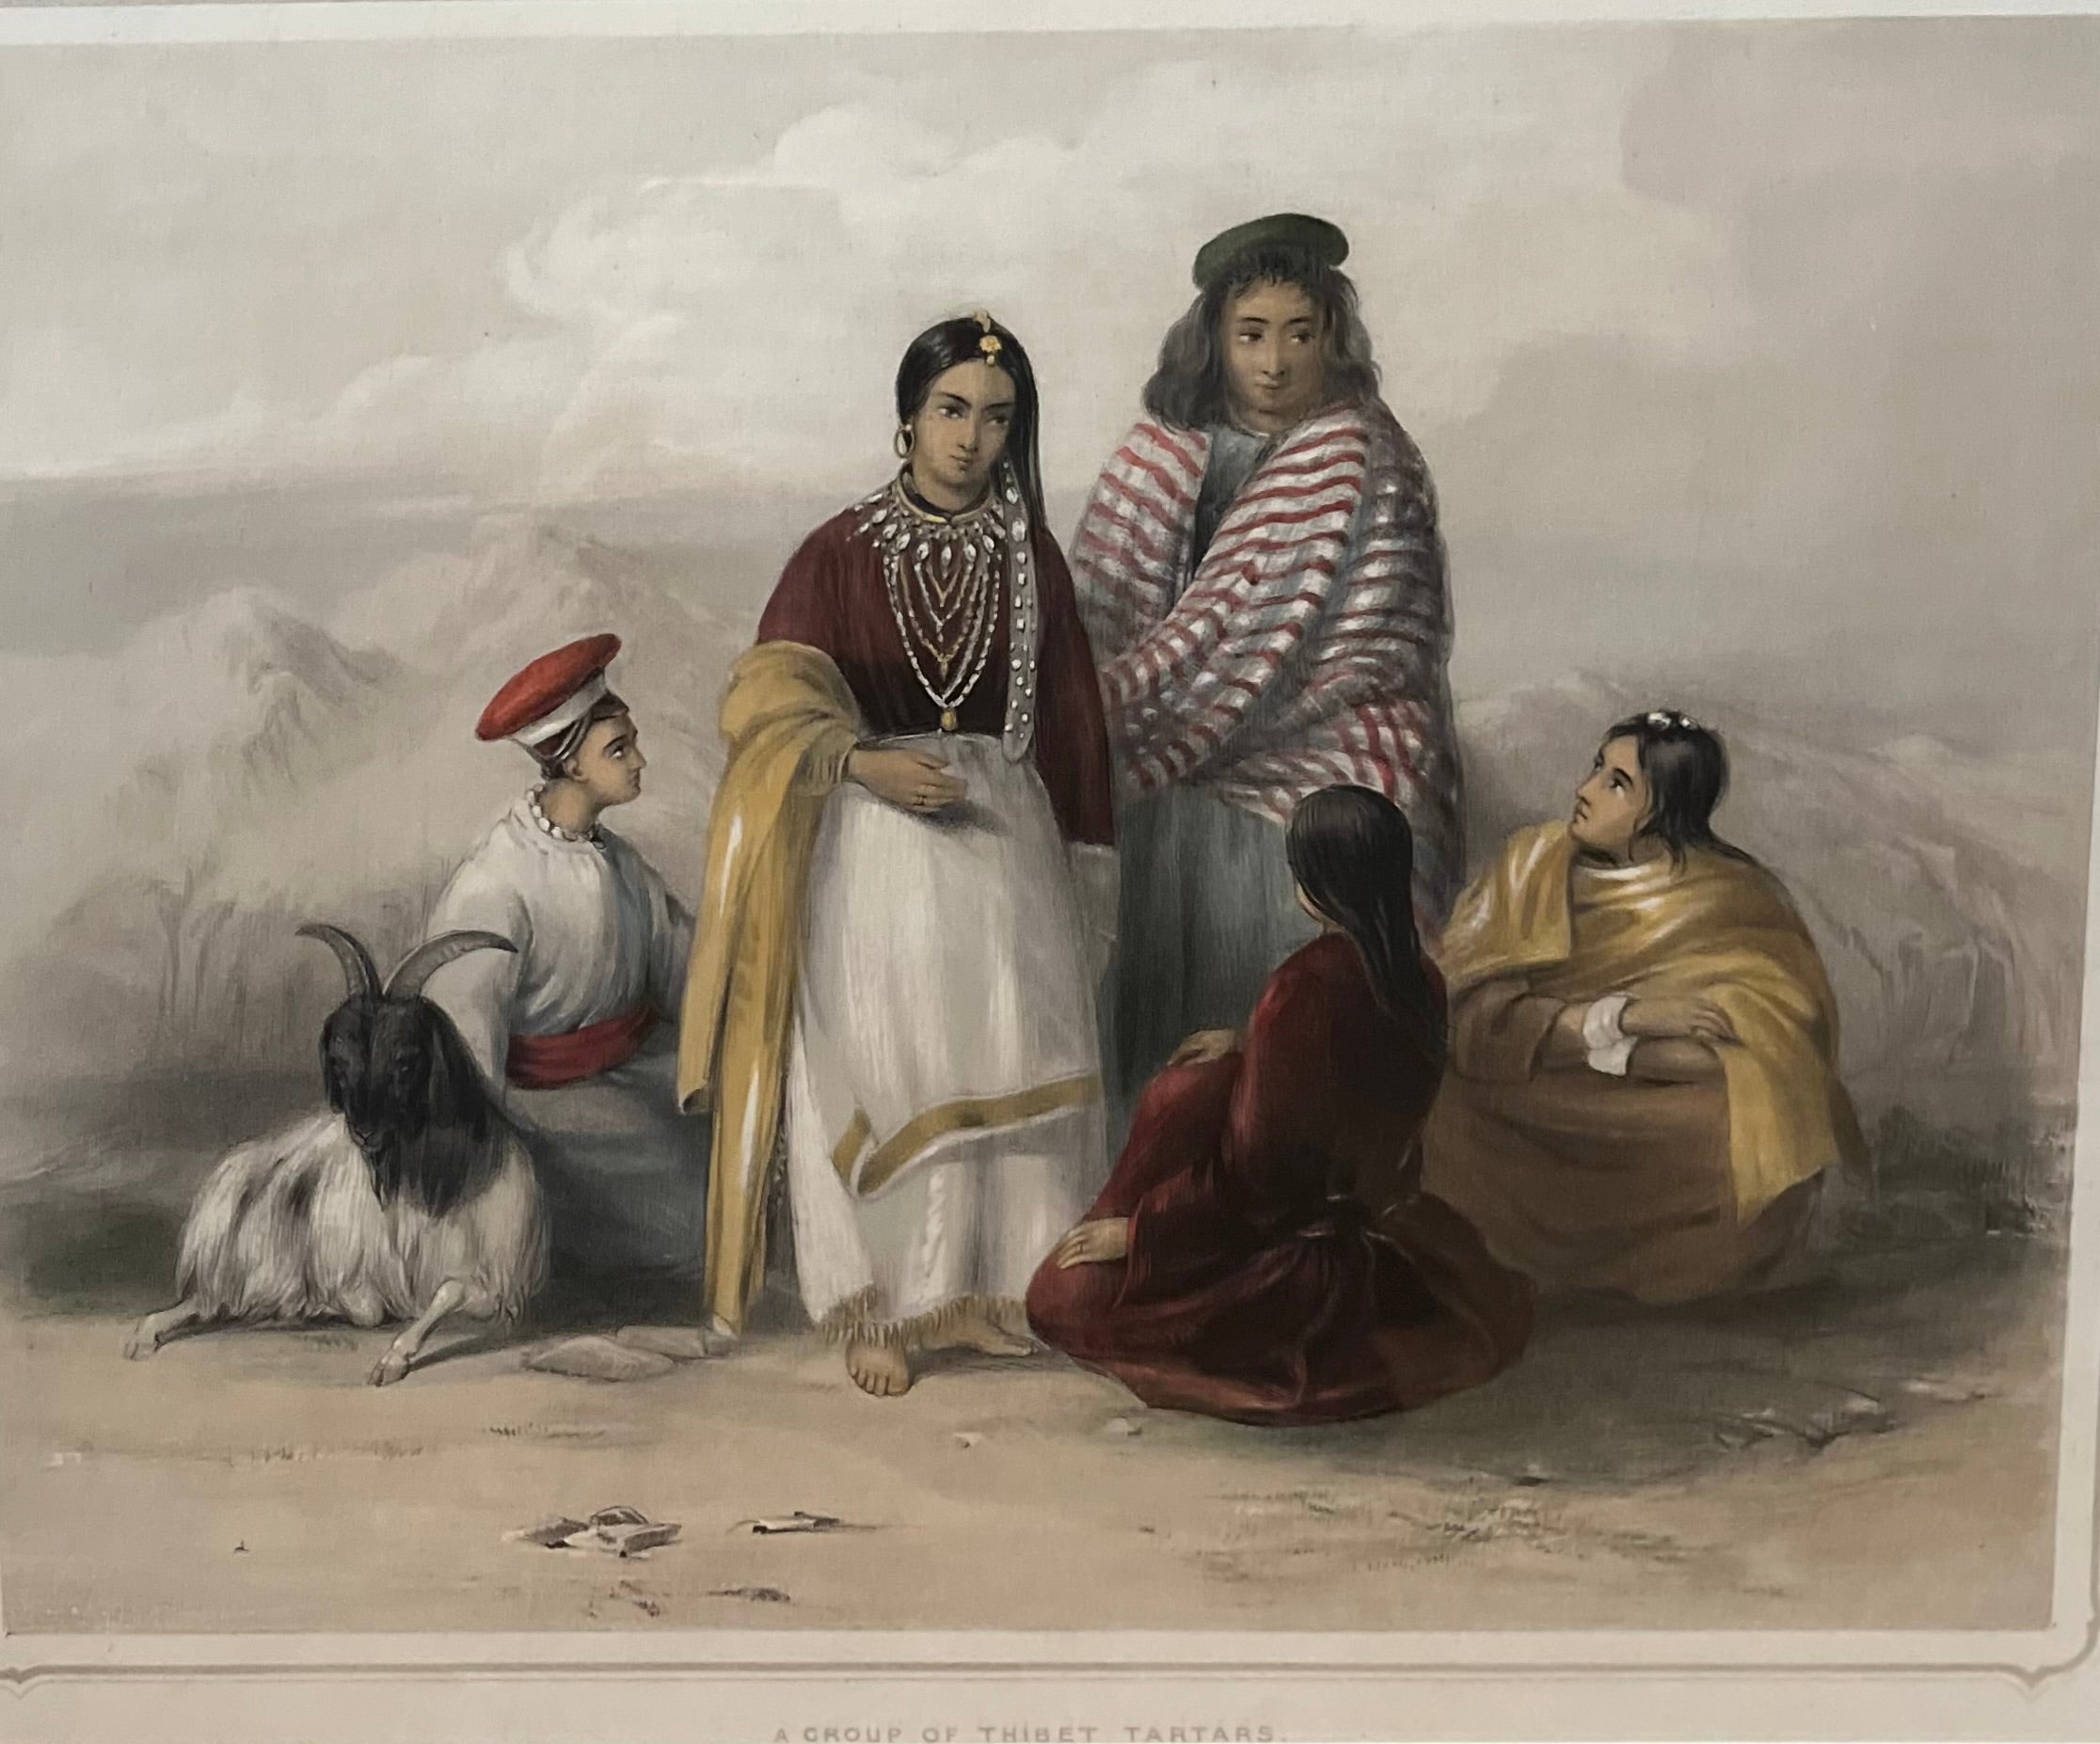 A group of 14 hand-coloured lithographs, including the frontispiece, from Emily Eden's Portraits of the People and Princes of India J. Dickinson & Son, London, 1844